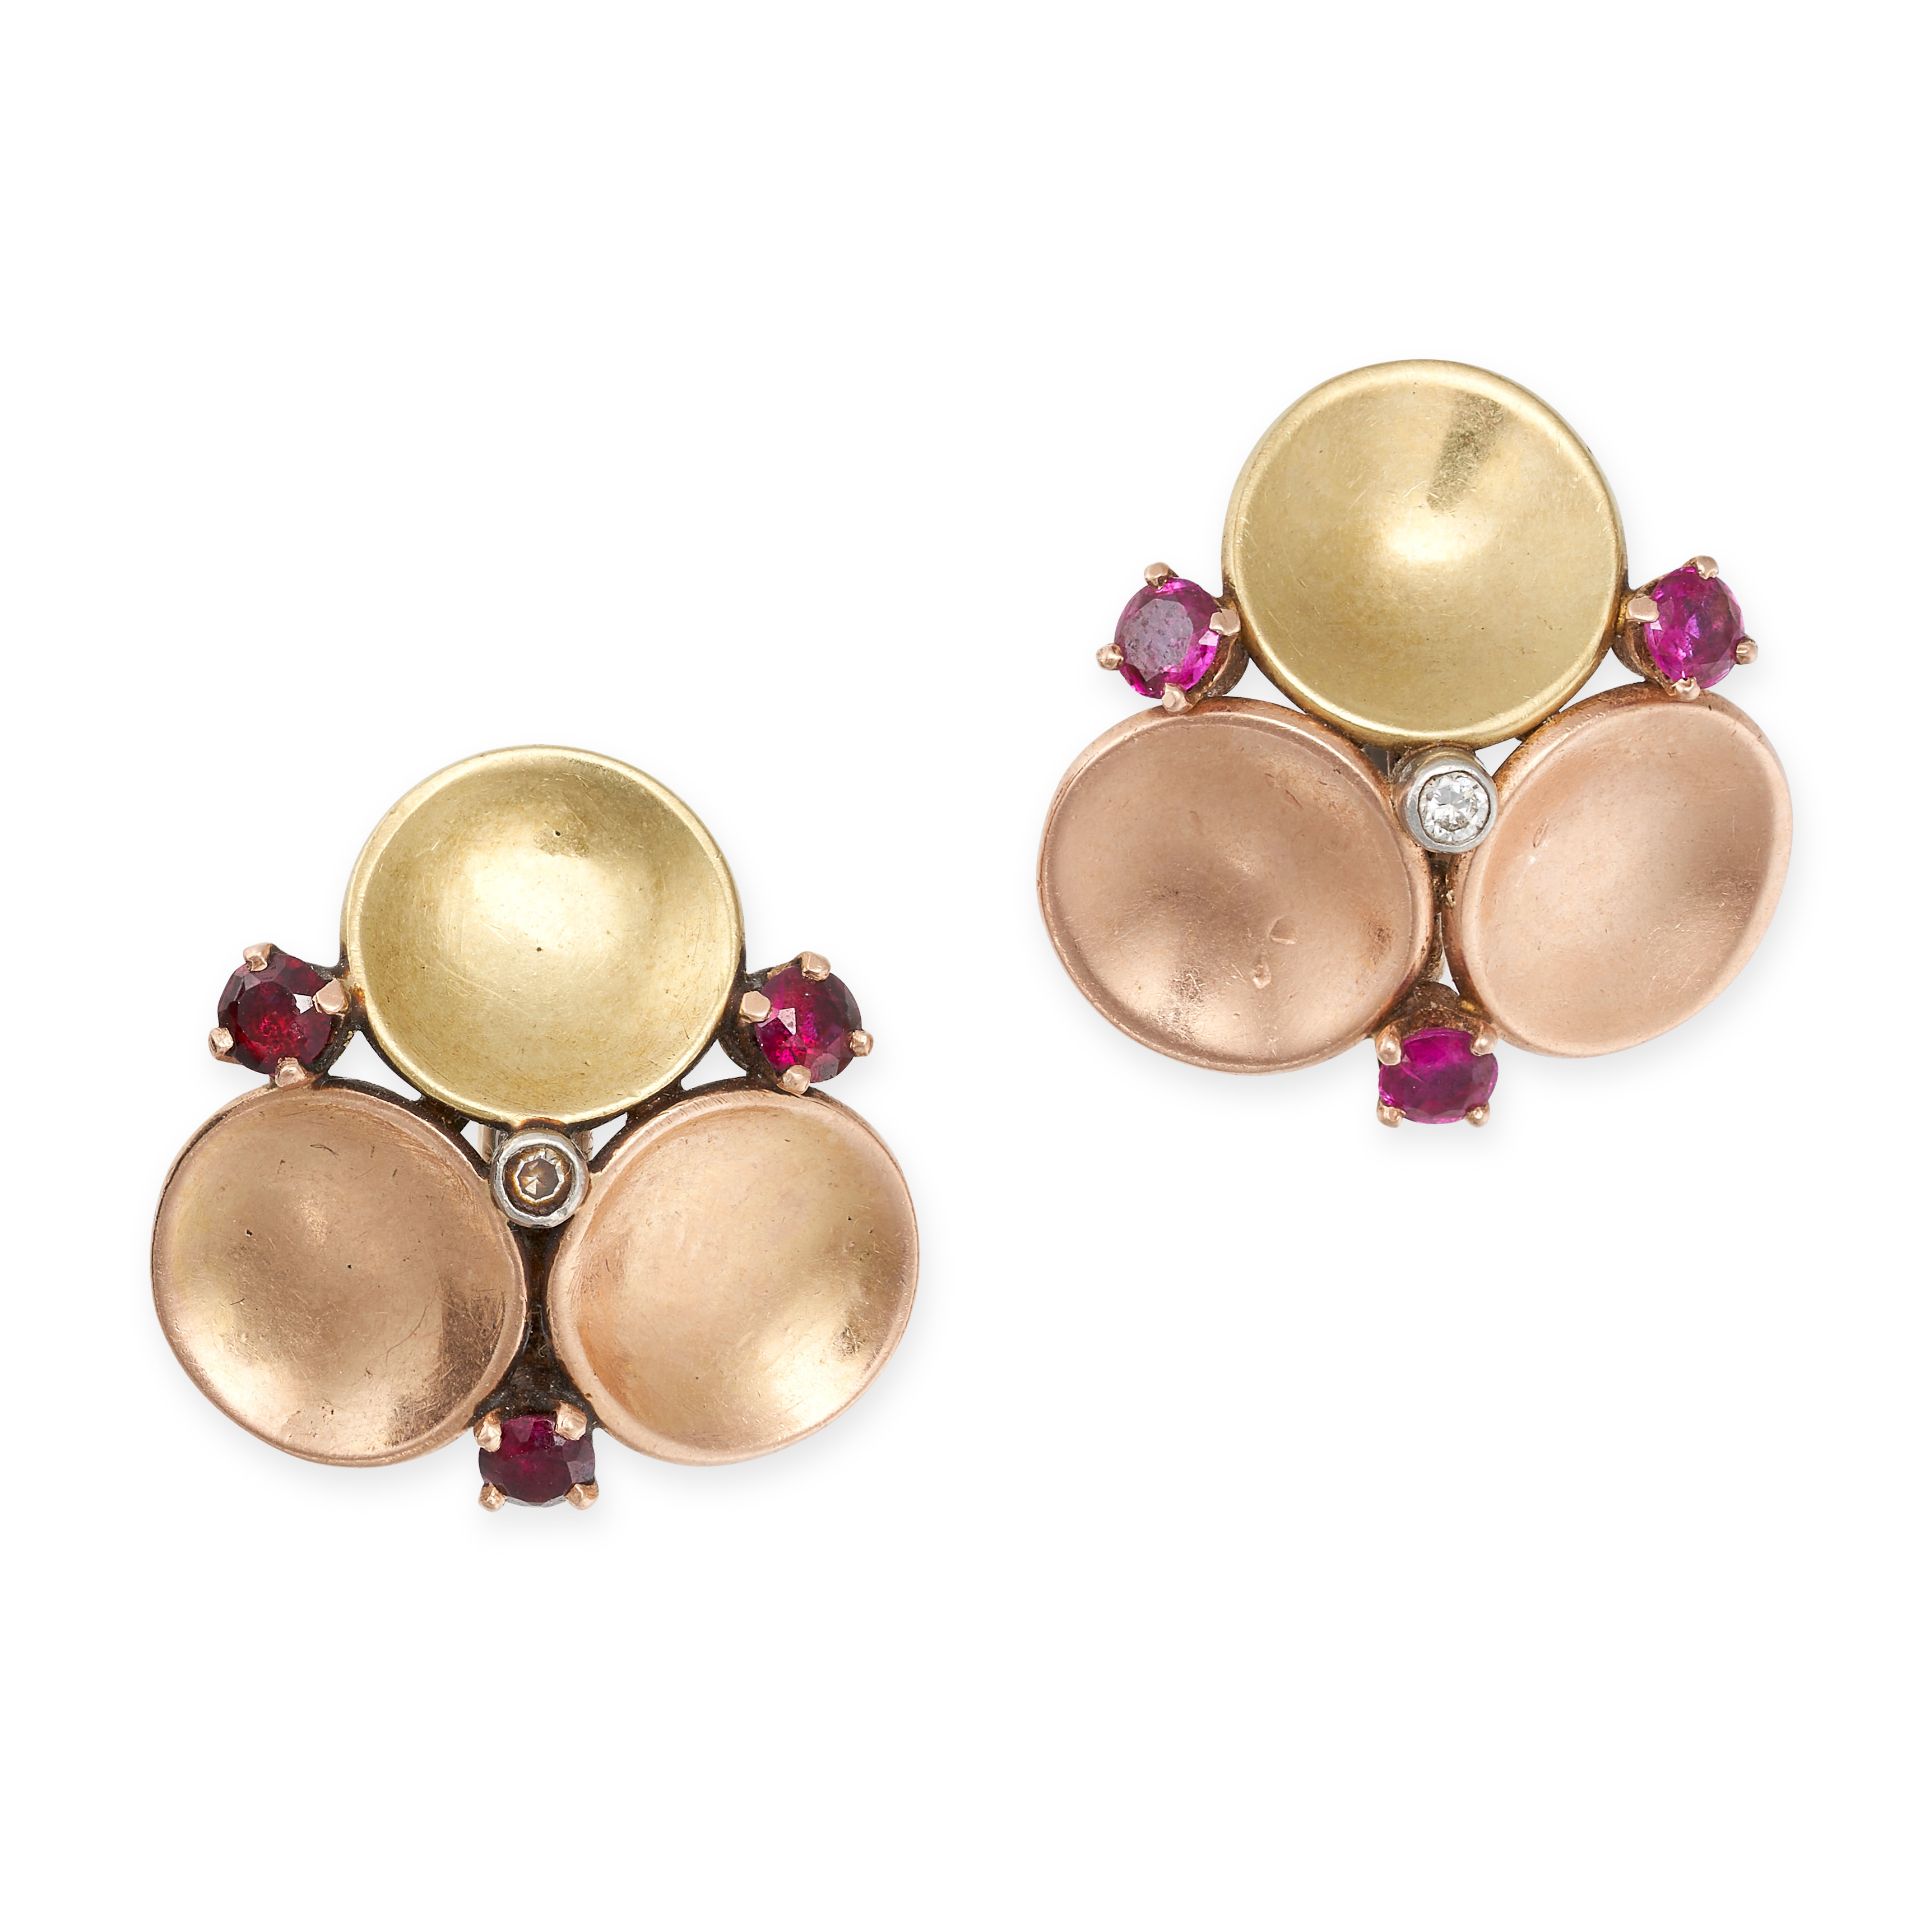 NO RESERVE - A PAIR OF RUBY AND DIAMOND EARRINGS in 14ct yellow and rose gold, each comprising a ...